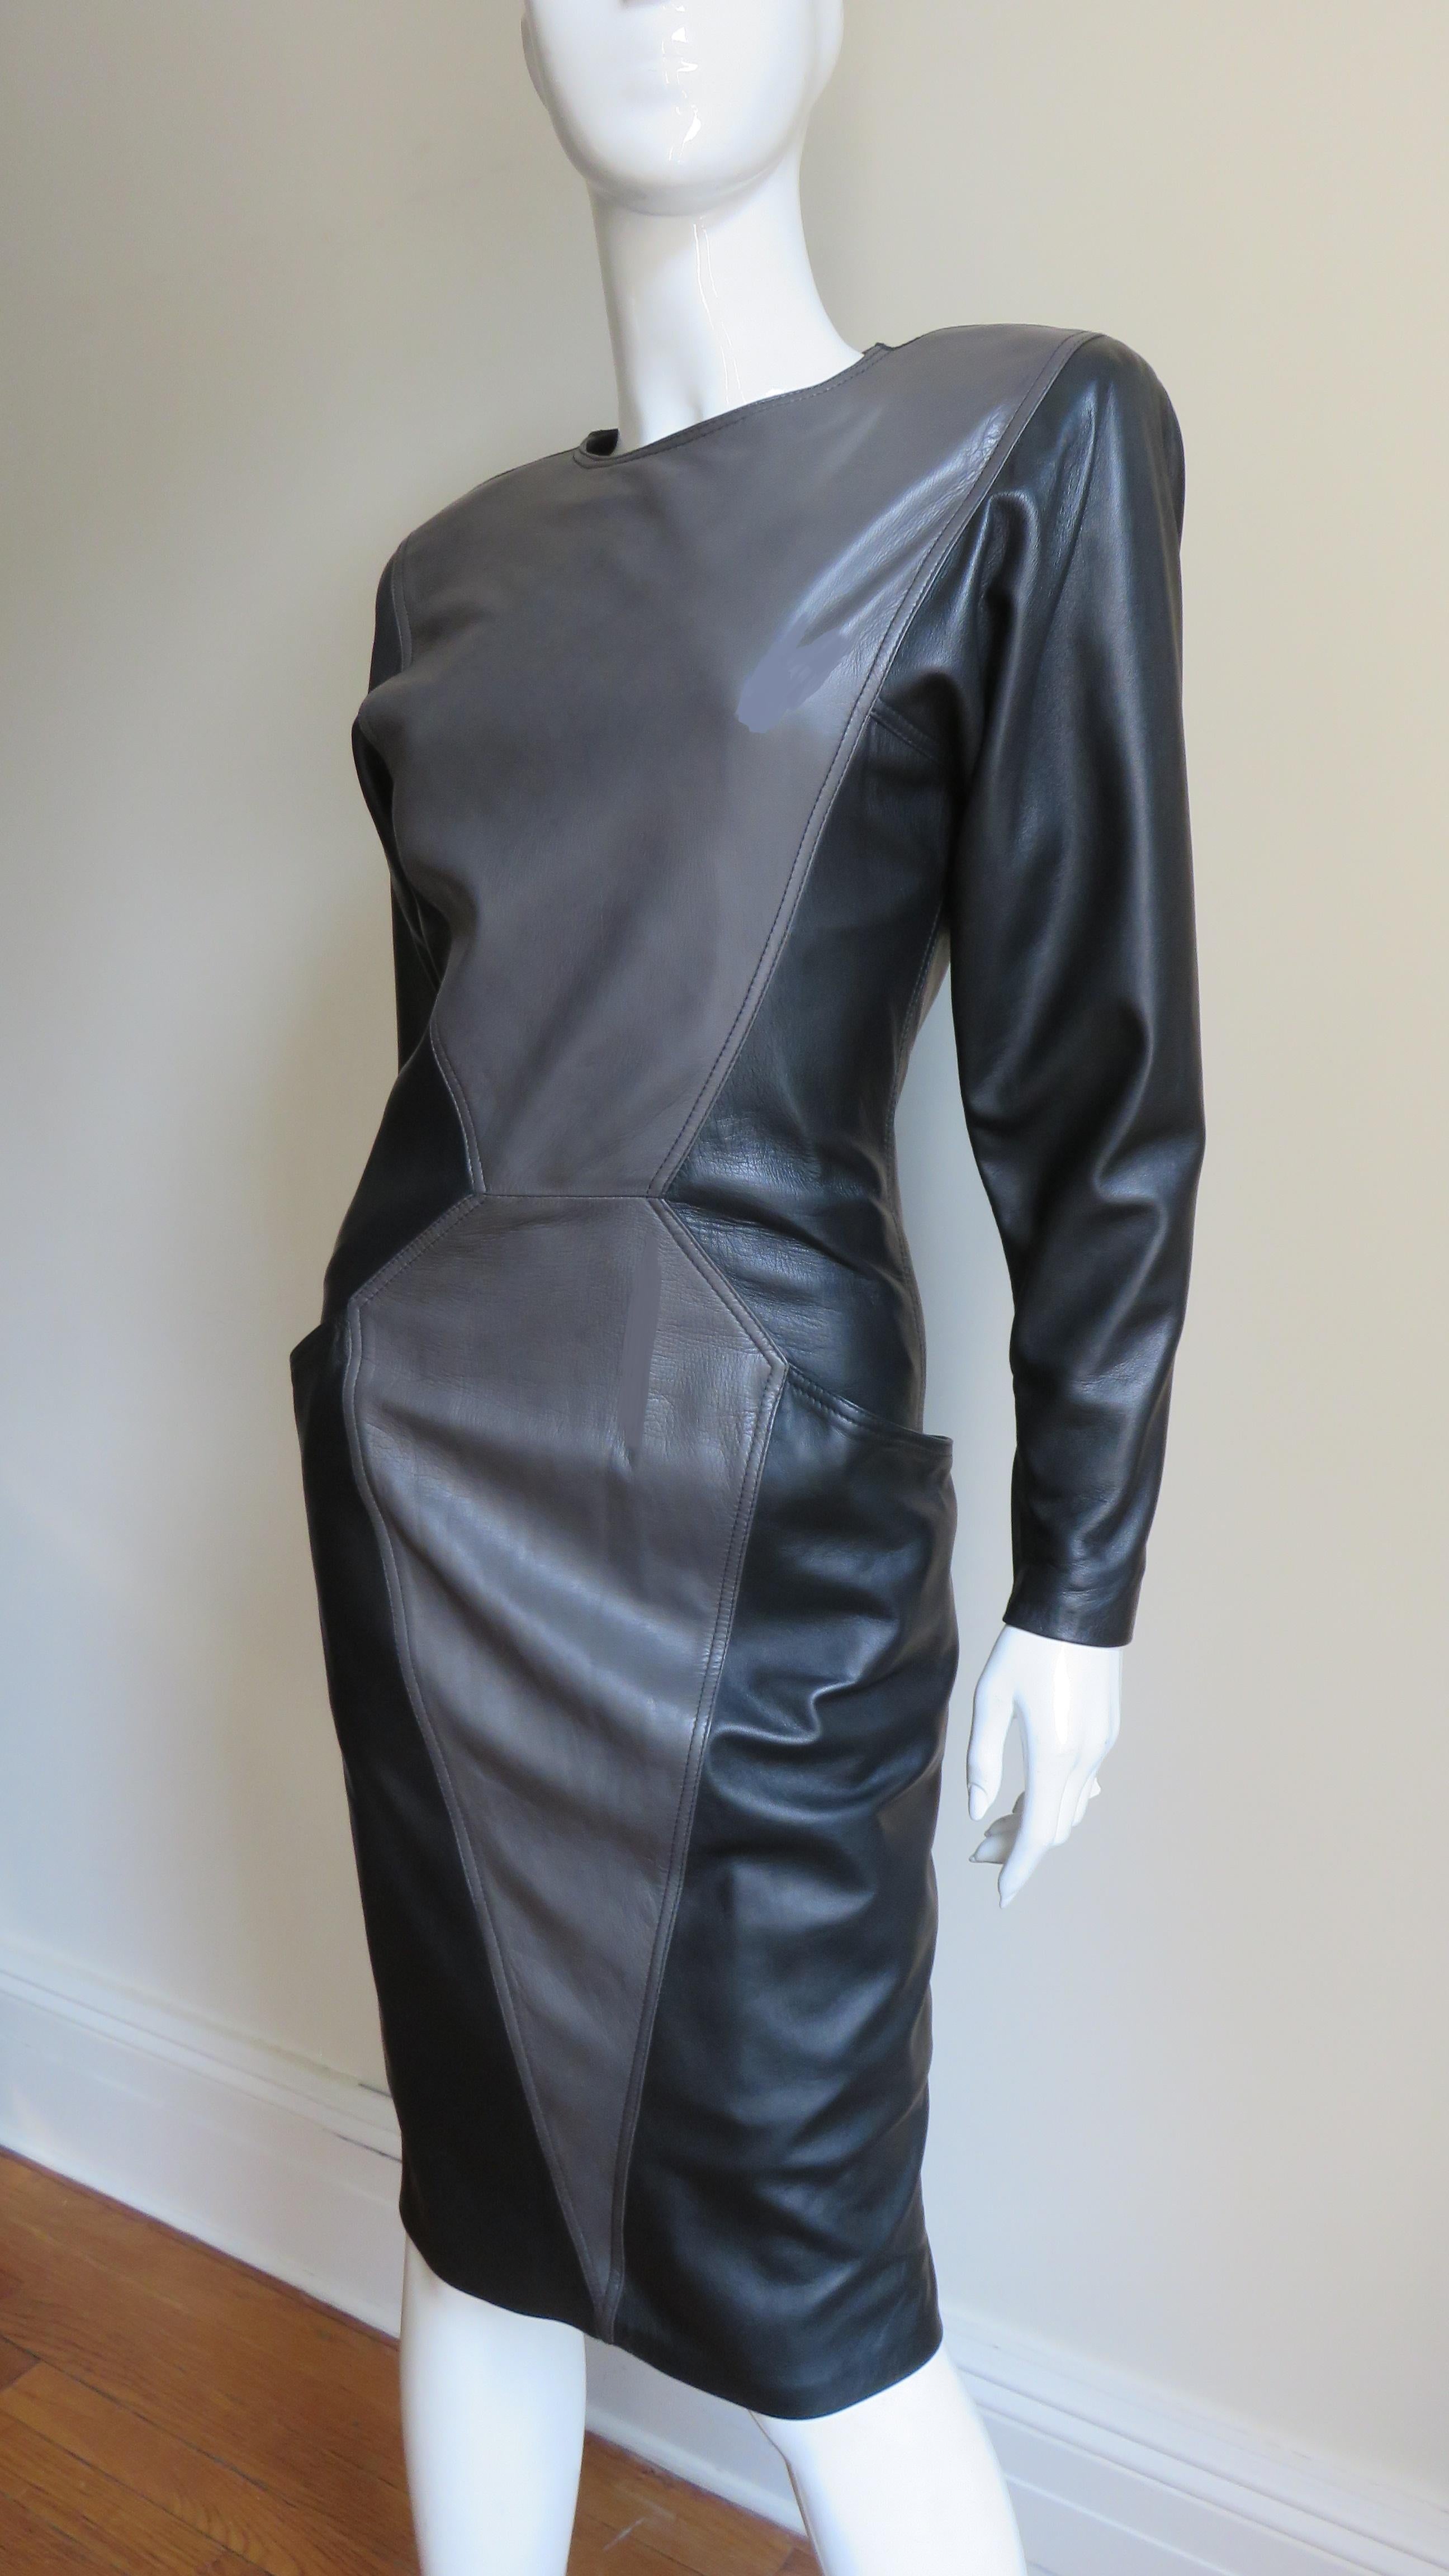 A fabulous soft, supple leather dress by Emanuel Ungaro in black and grey.  It has a crew neckline, long sleeves with zipper cuffs and shoulder pads. The dress is black with an angular grey center front panel on the bodice and skirt flatteringly